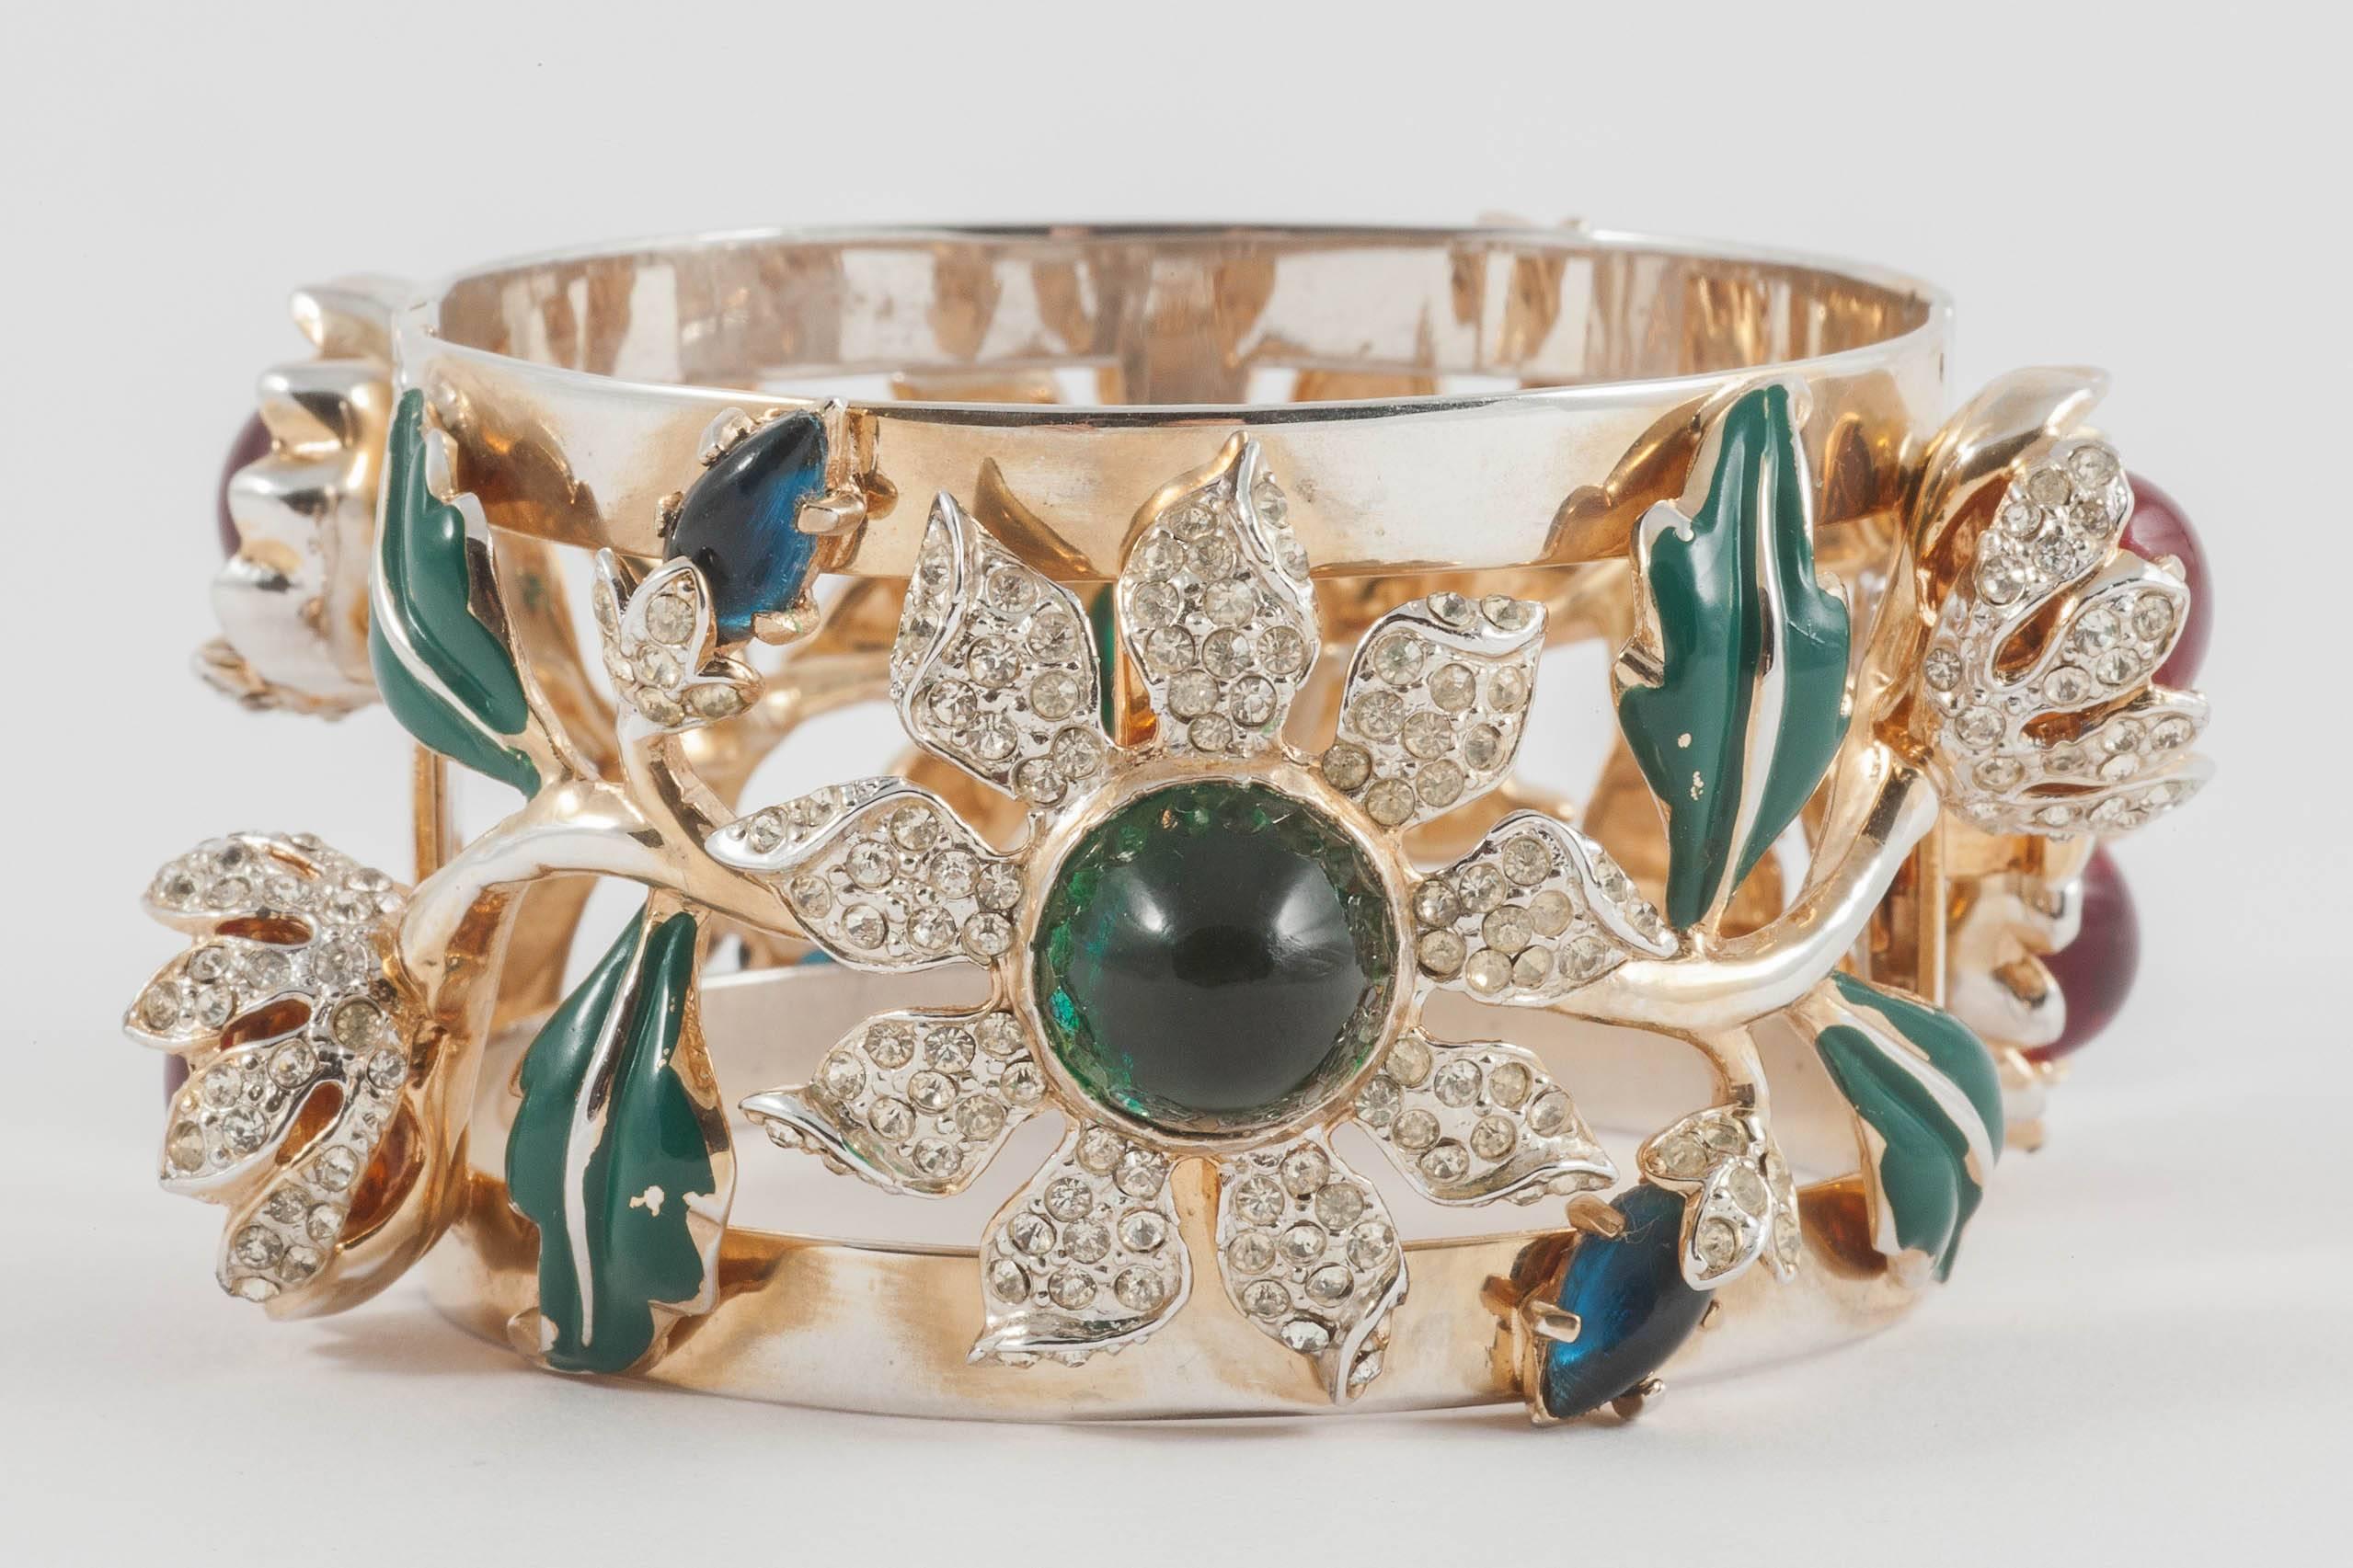 A bracelet of high, high Hollywood glamour (Carmen Miranda wore two of these bracelets, one on top of the other, in the film 'Date with Judy', 1948) and instant impact, it is a very famous design and very collectable. Made from clear paste/paste